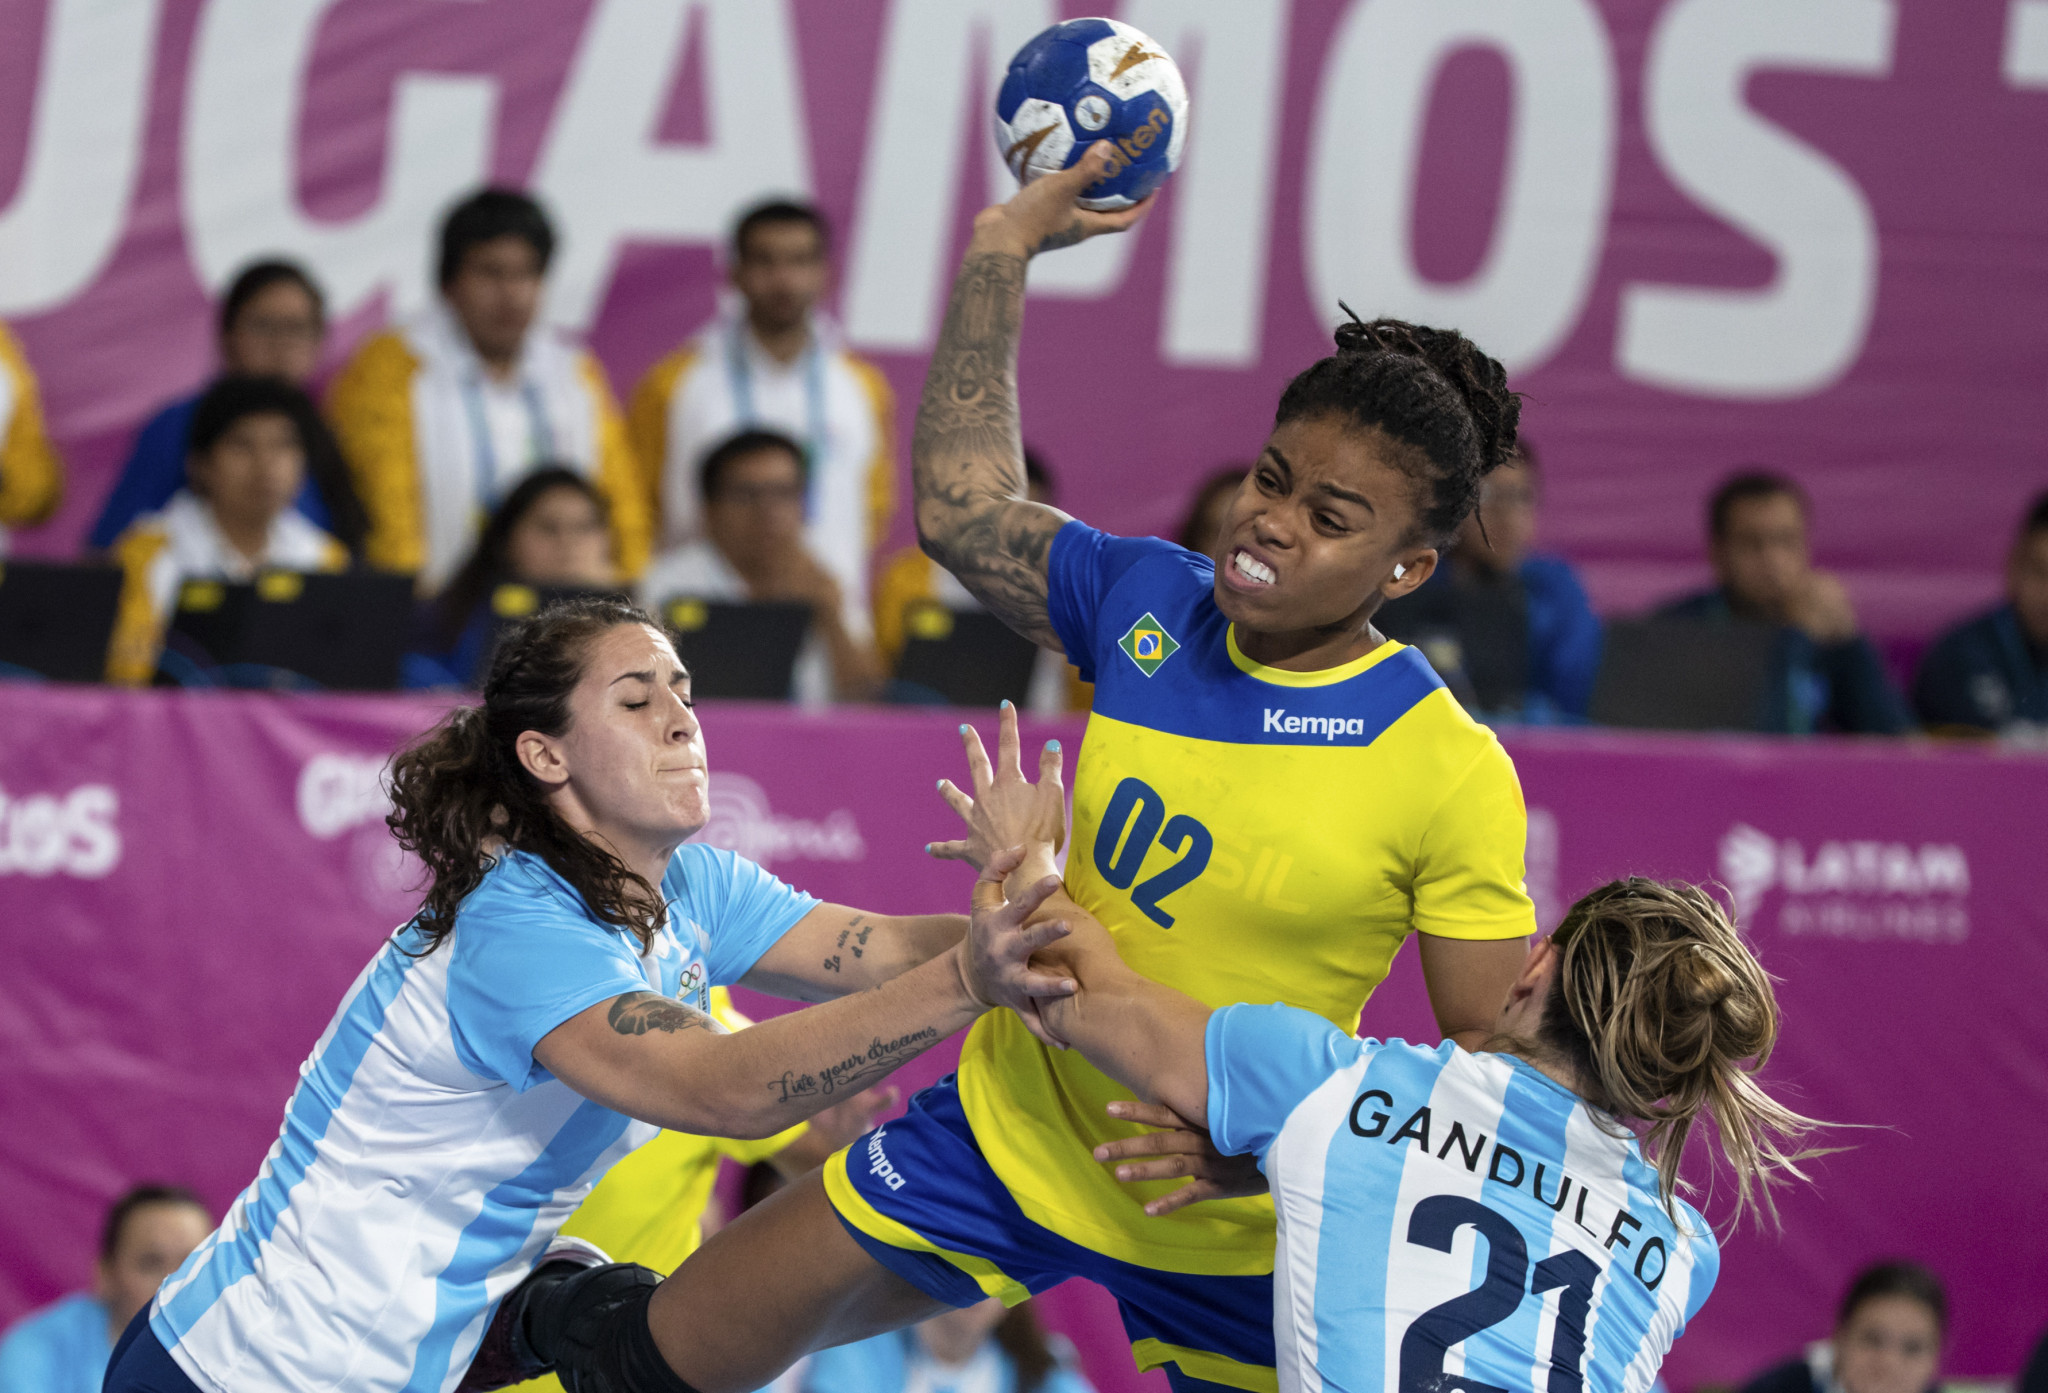 Brazil qualify for Tokyo 2020 with handball victory at Lima 2019